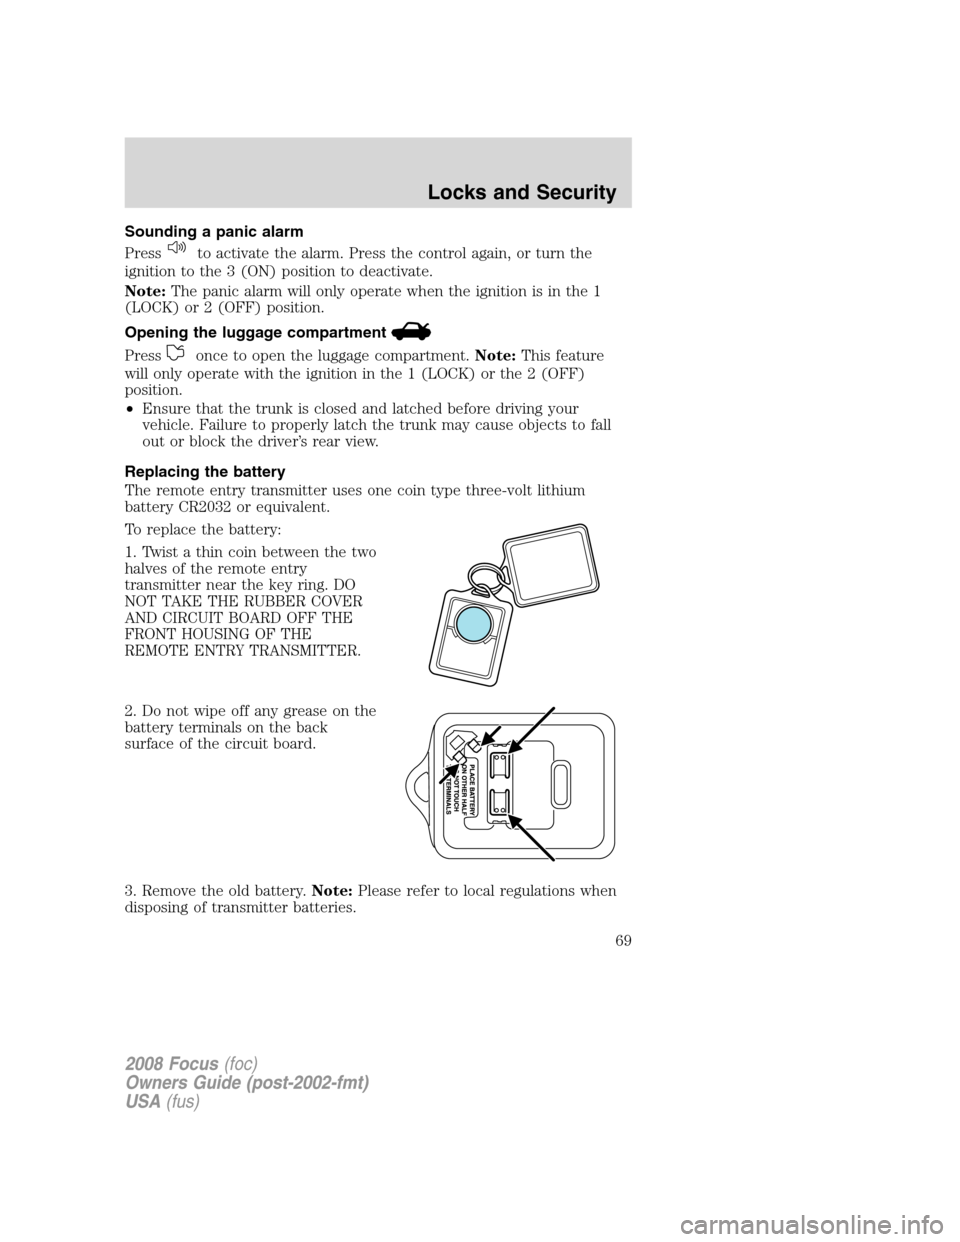 FORD FOCUS 2008 2.G Owners Manual Sounding a panic alarm
Press
to activate the alarm. Press the control again, or turn the
ignition to the 3 (ON) position to deactivate.
Note:The panic alarm will only operate when the ignition is in t